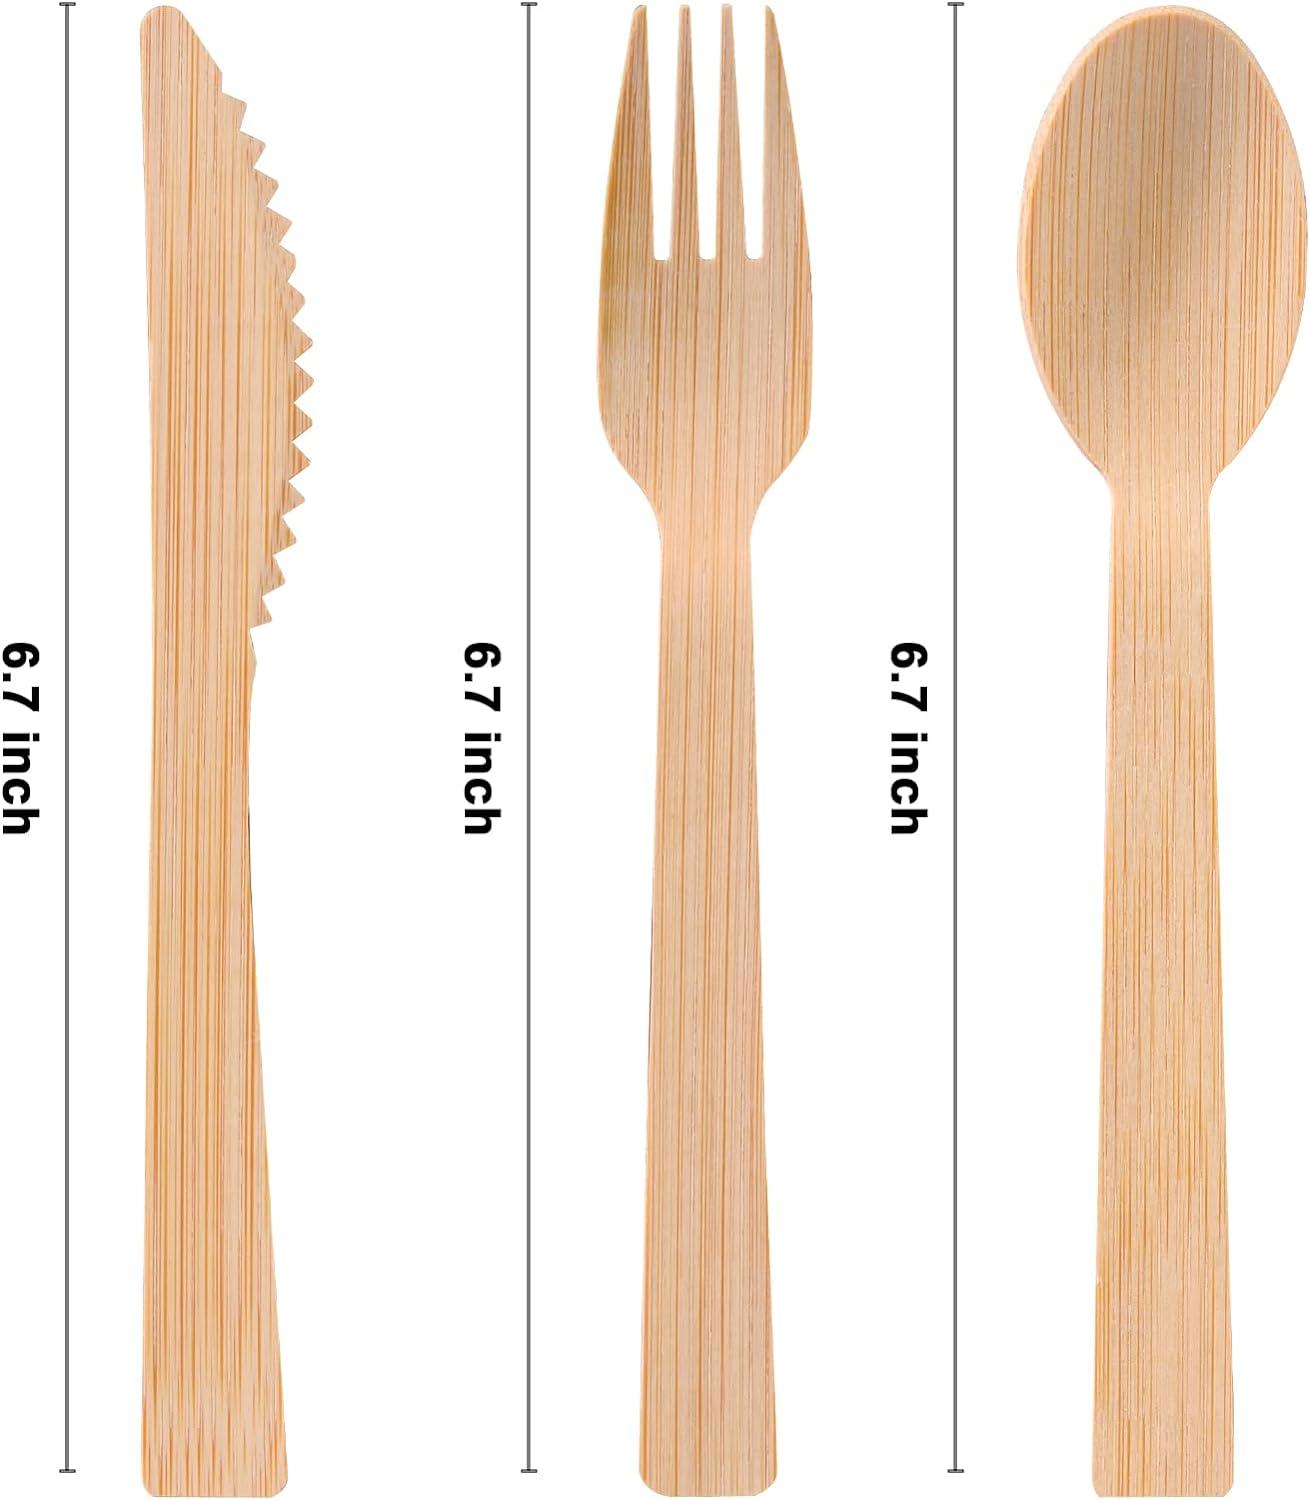 Bamboo Utensils Cutlery Set - 6 Knives, 6 Forks, 6 Spoons